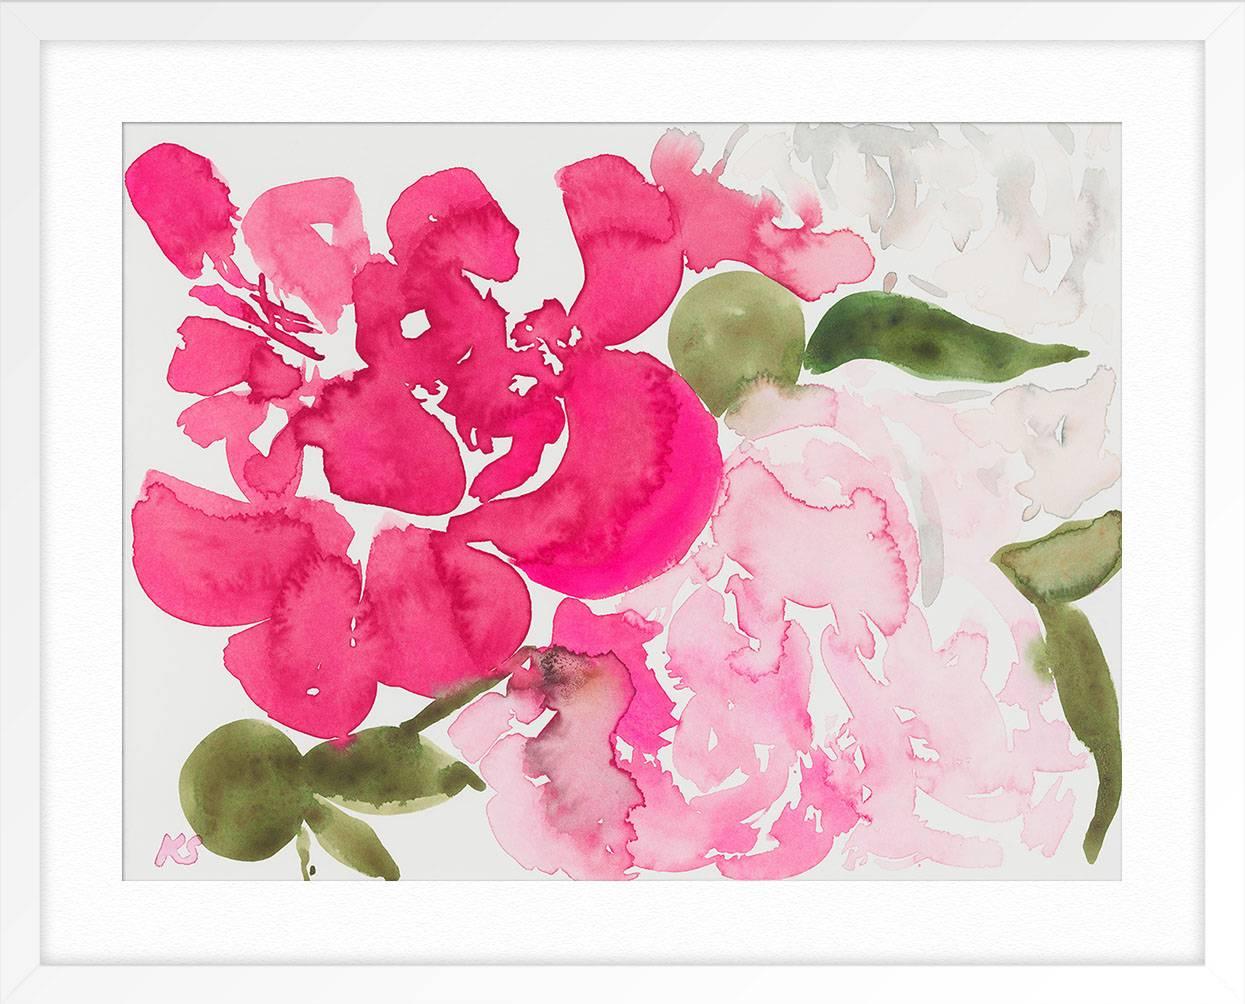 ABOUT THIS PIECE: Peonies was created as a special collaboration with domino Magazine. Kate's New York apartment was featured in the Spring 2016 issue of domino. She created Peonies for her living room and our gallery produced a limited edition